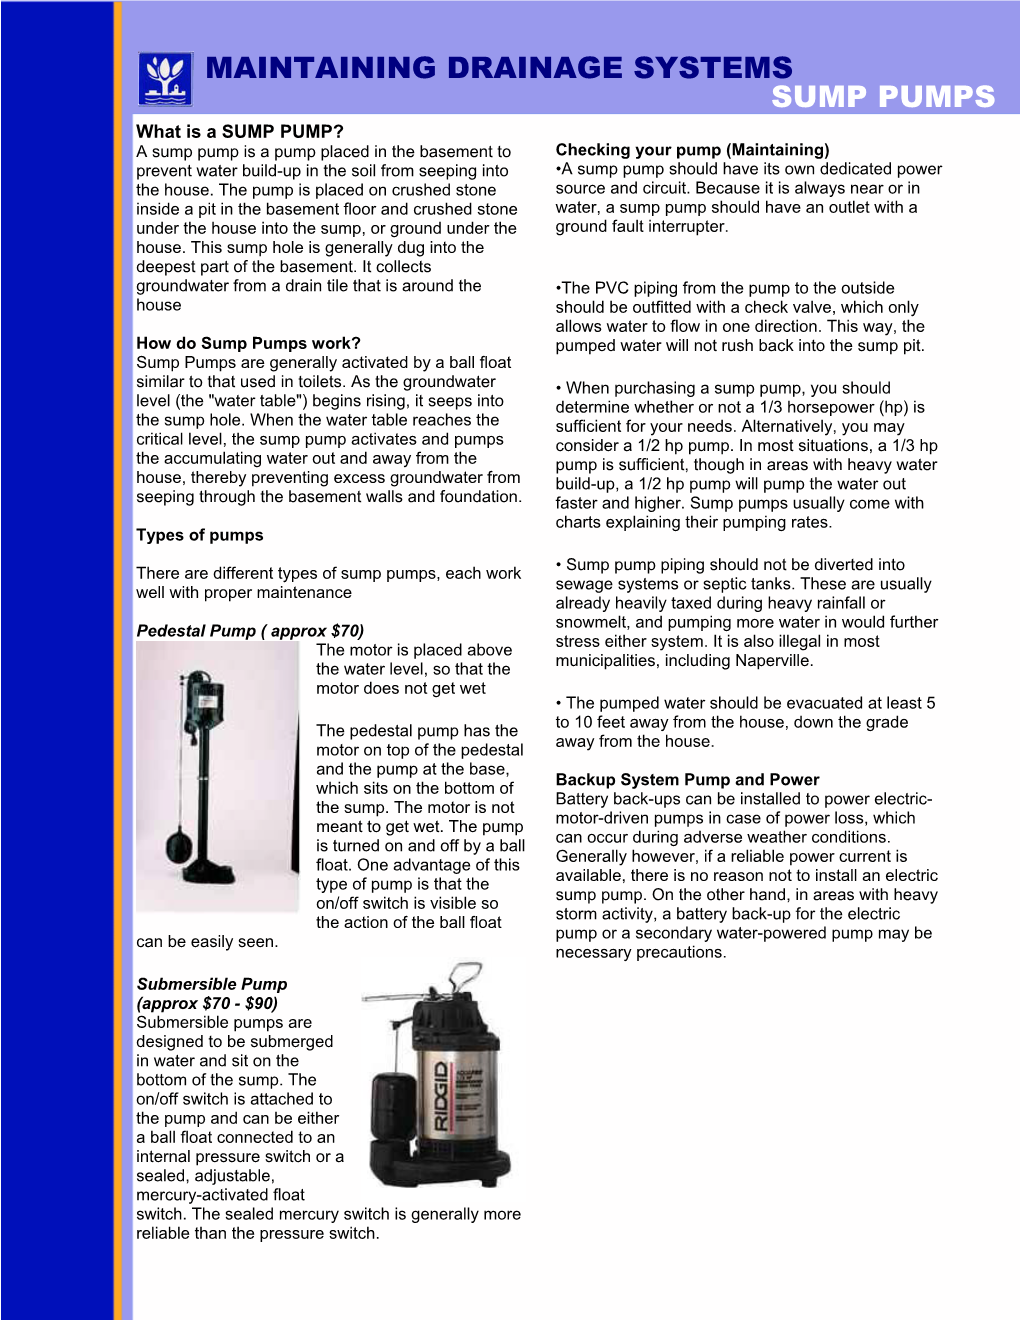 Sump Pumps Maintaining Drainage Systems